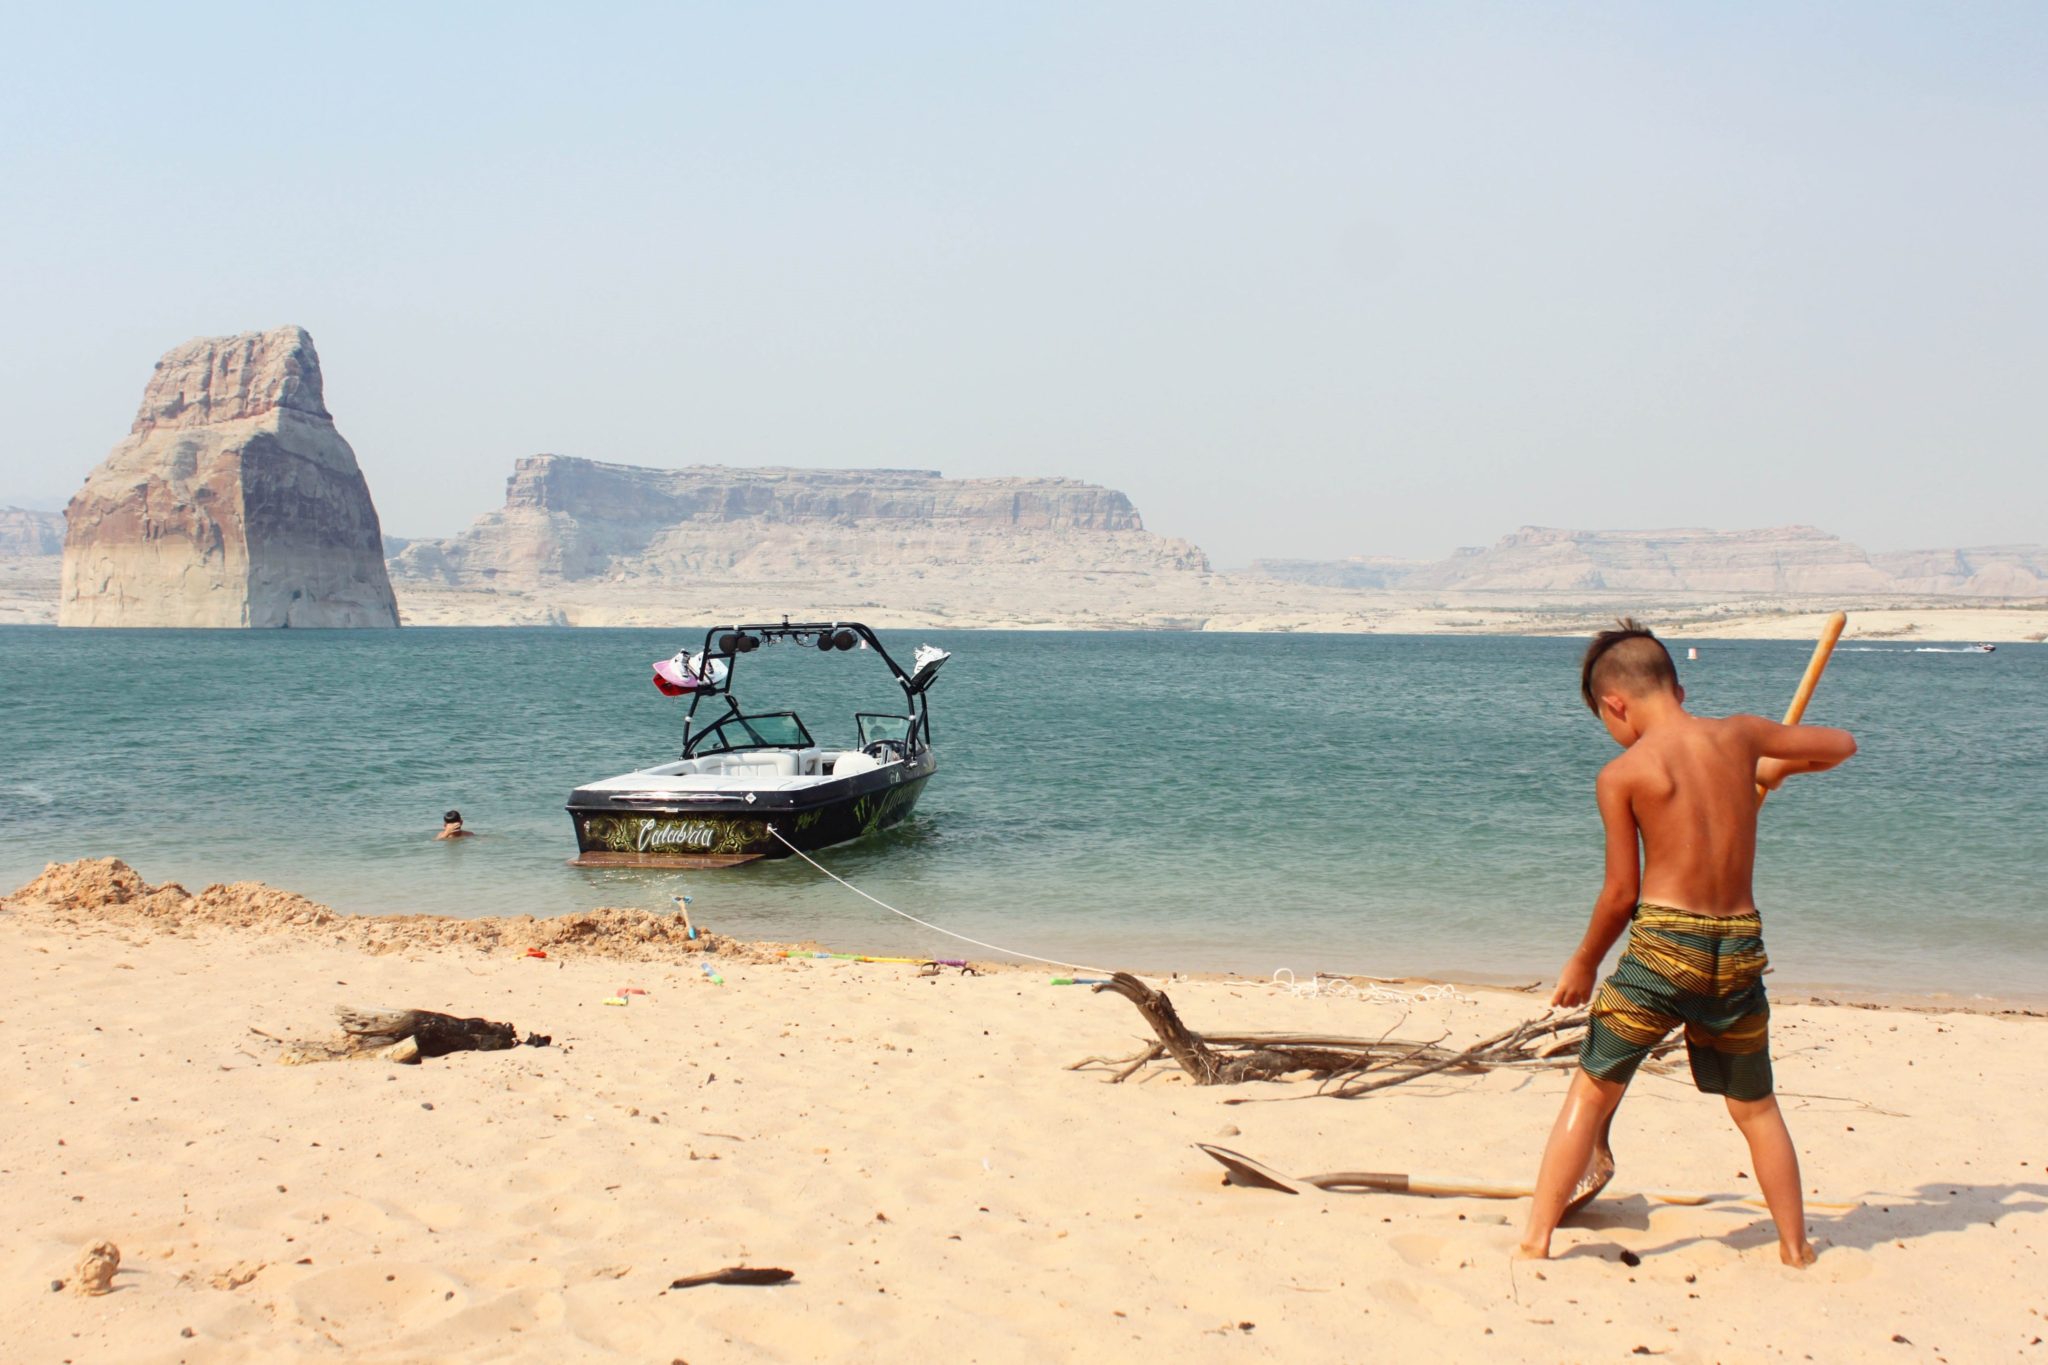 Where to stay at Lake Powell and tips for camping at Lone Rock Beach #lakepowell #utah #arizona #boating #simplywander